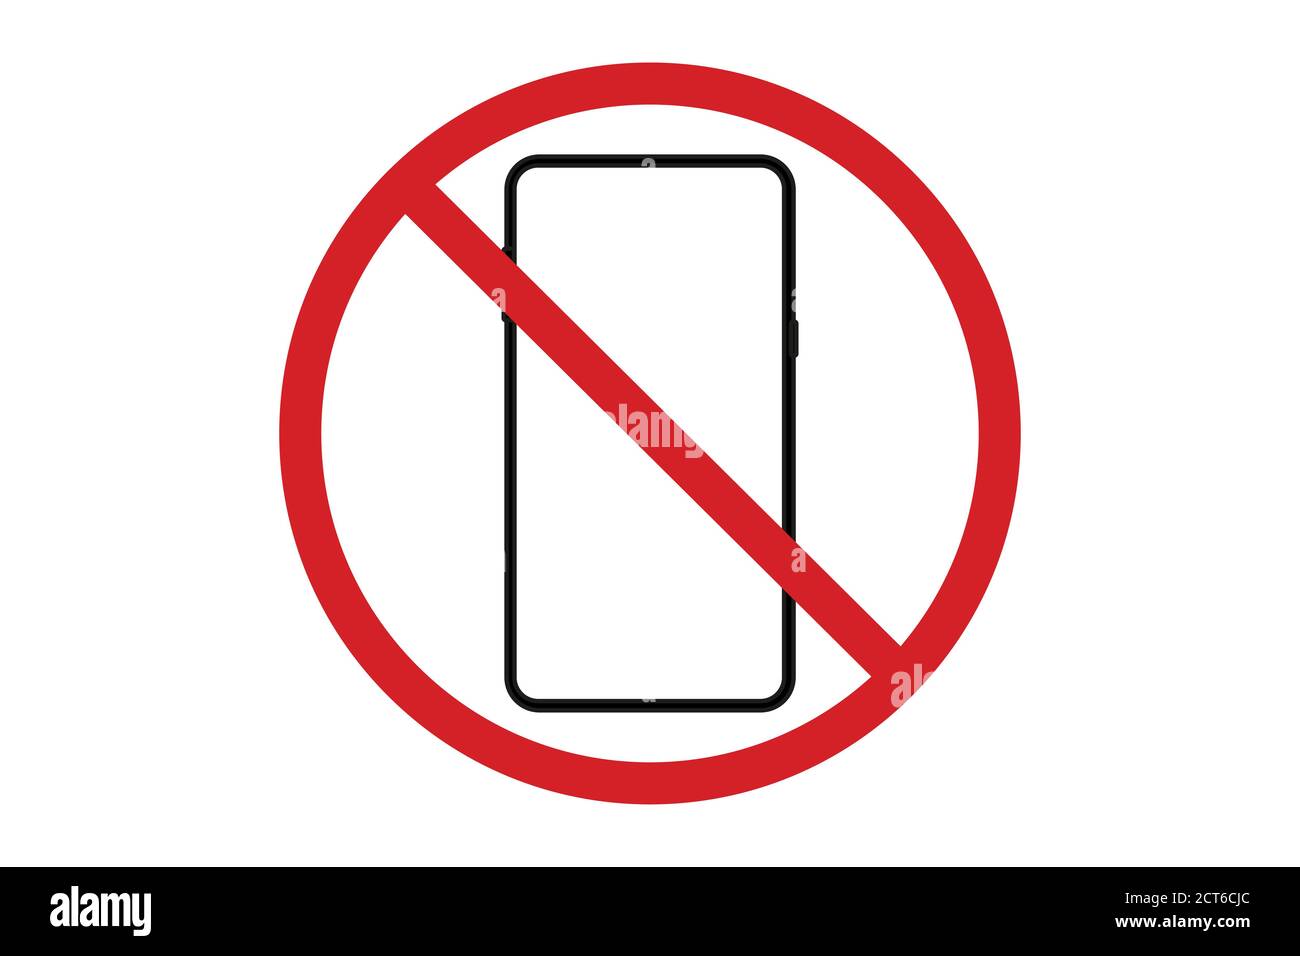 No phone sign on white background. Stock Vector